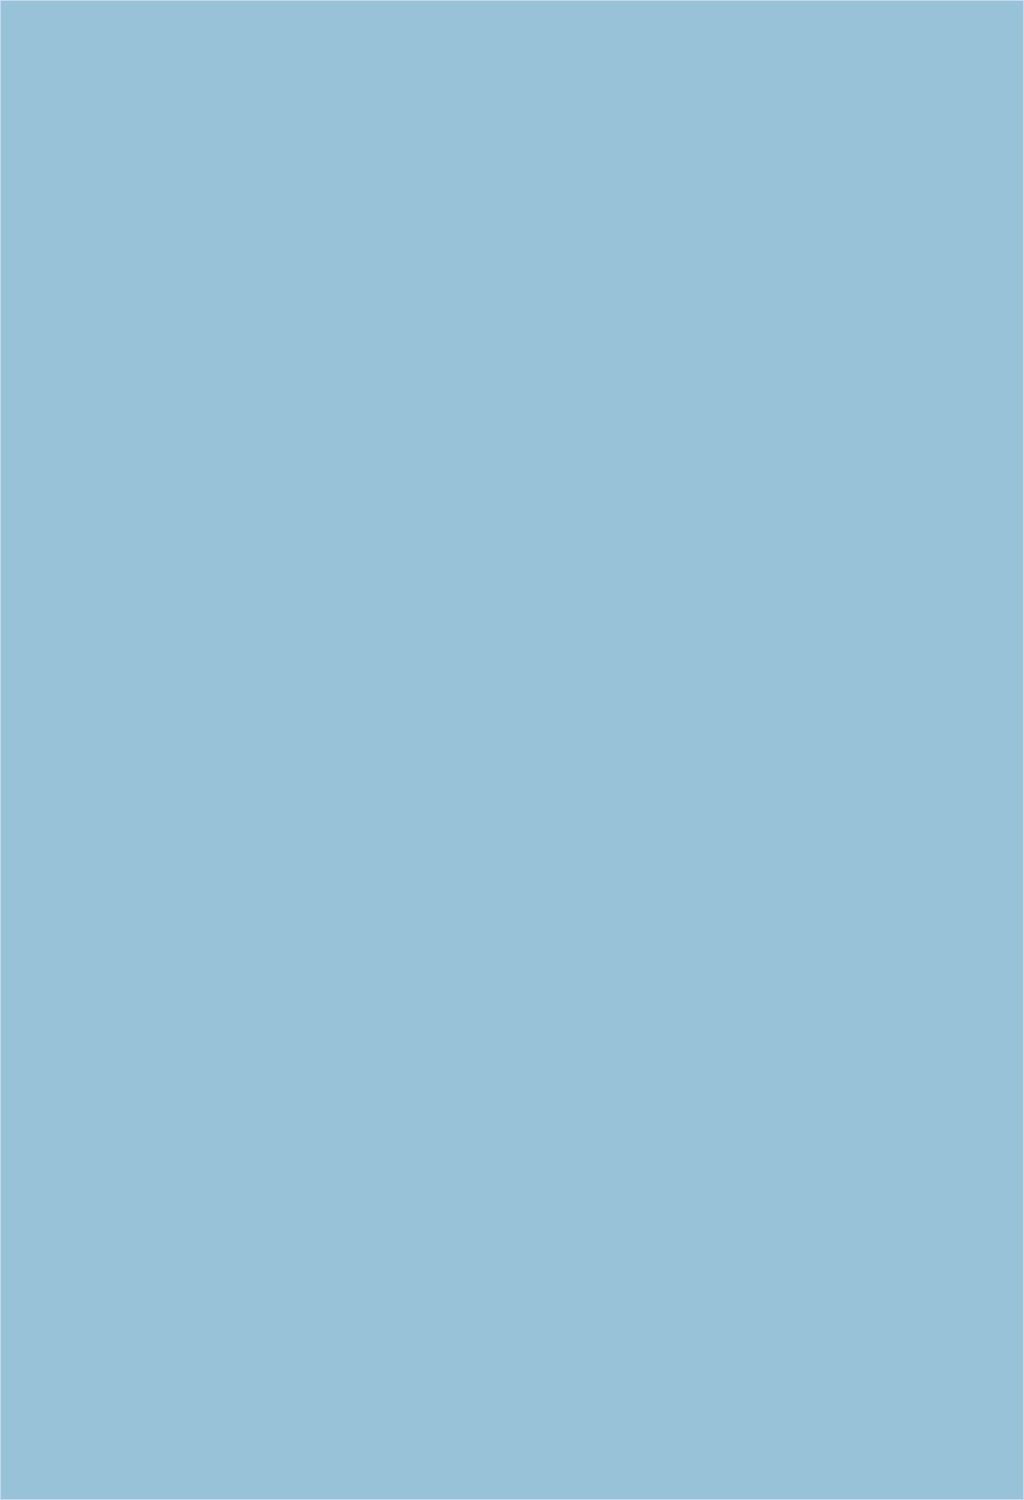 A blue background with white text - Light blue, pastel blue, blue